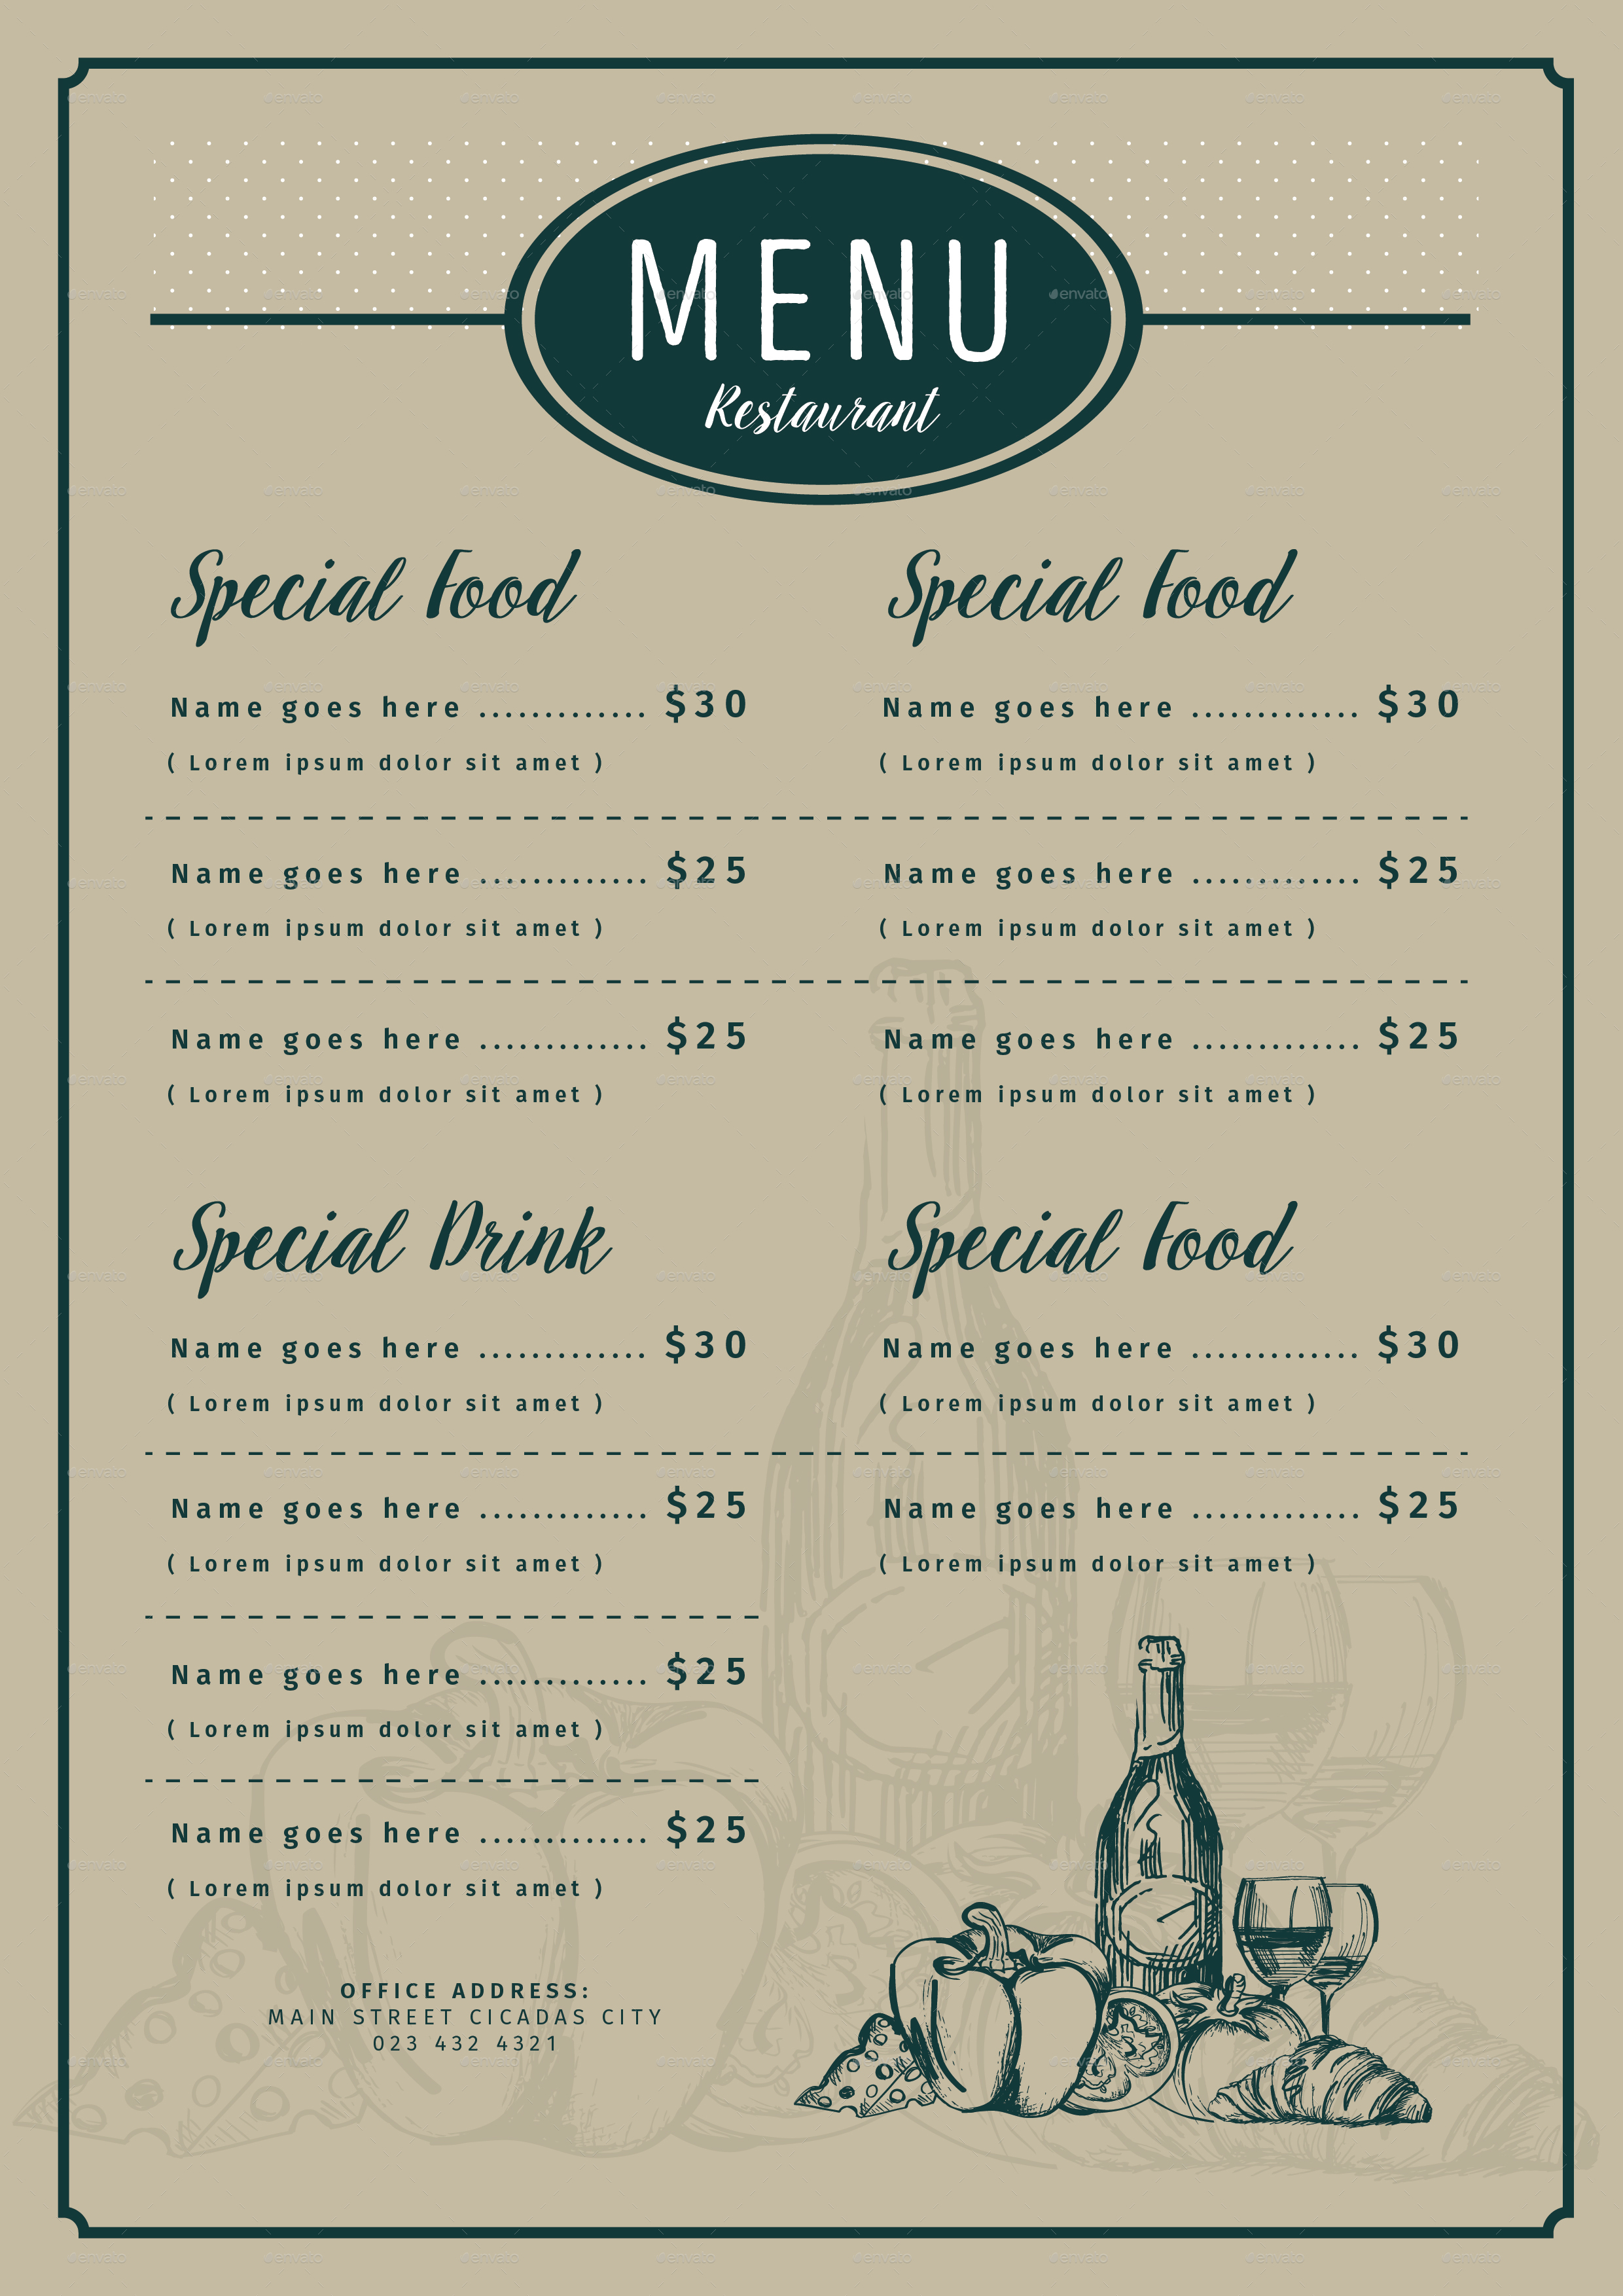 Vintage Menu Restaurant by lilynthesweetpea | GraphicRiver